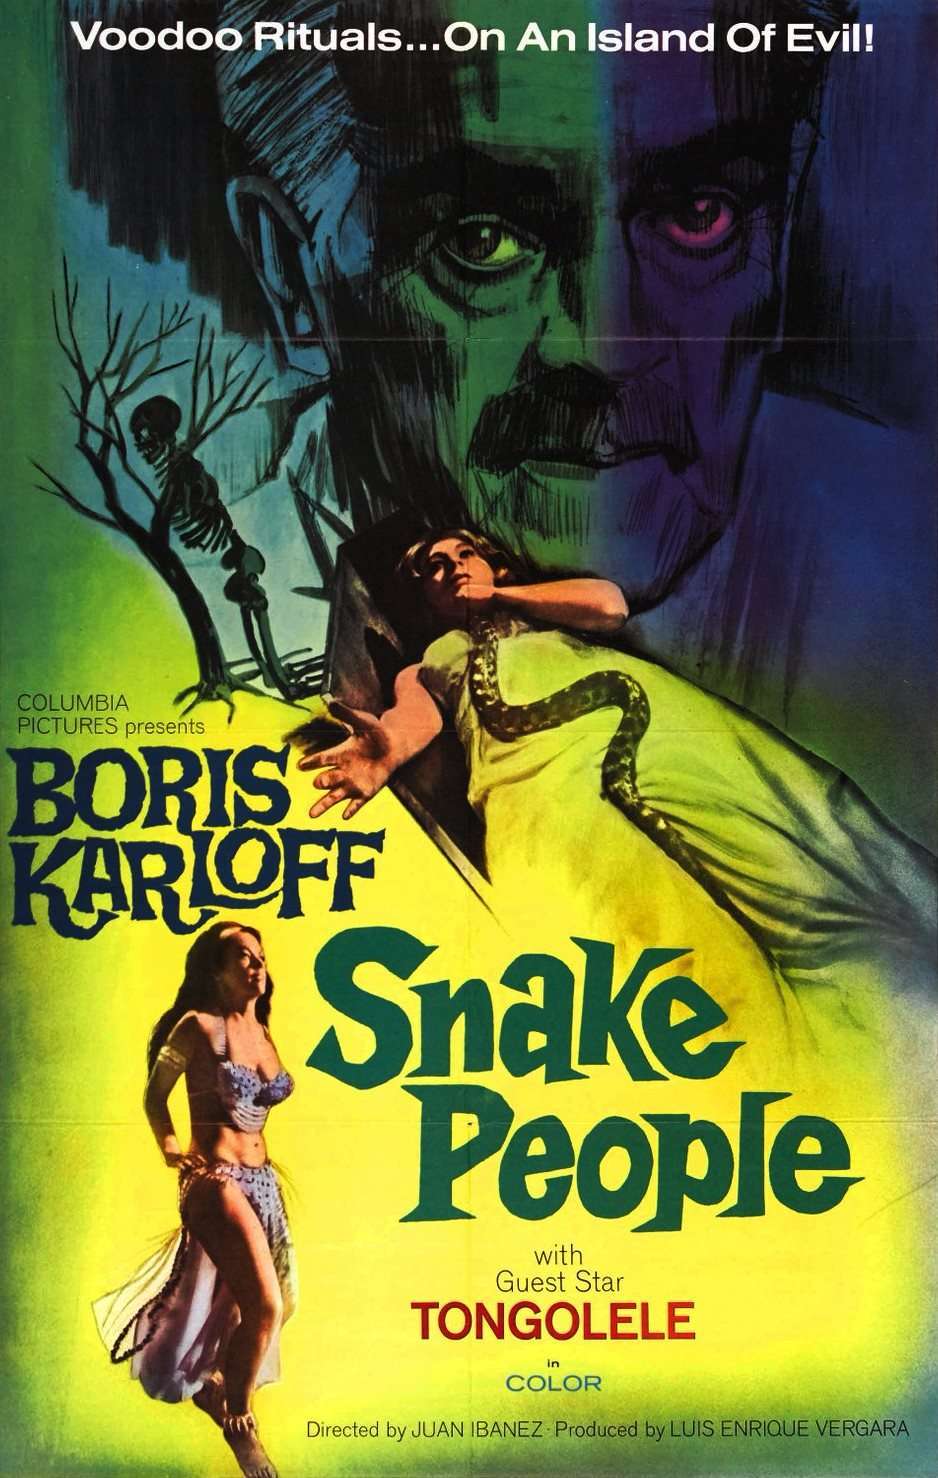 Isle of the Snake People (1971) poster